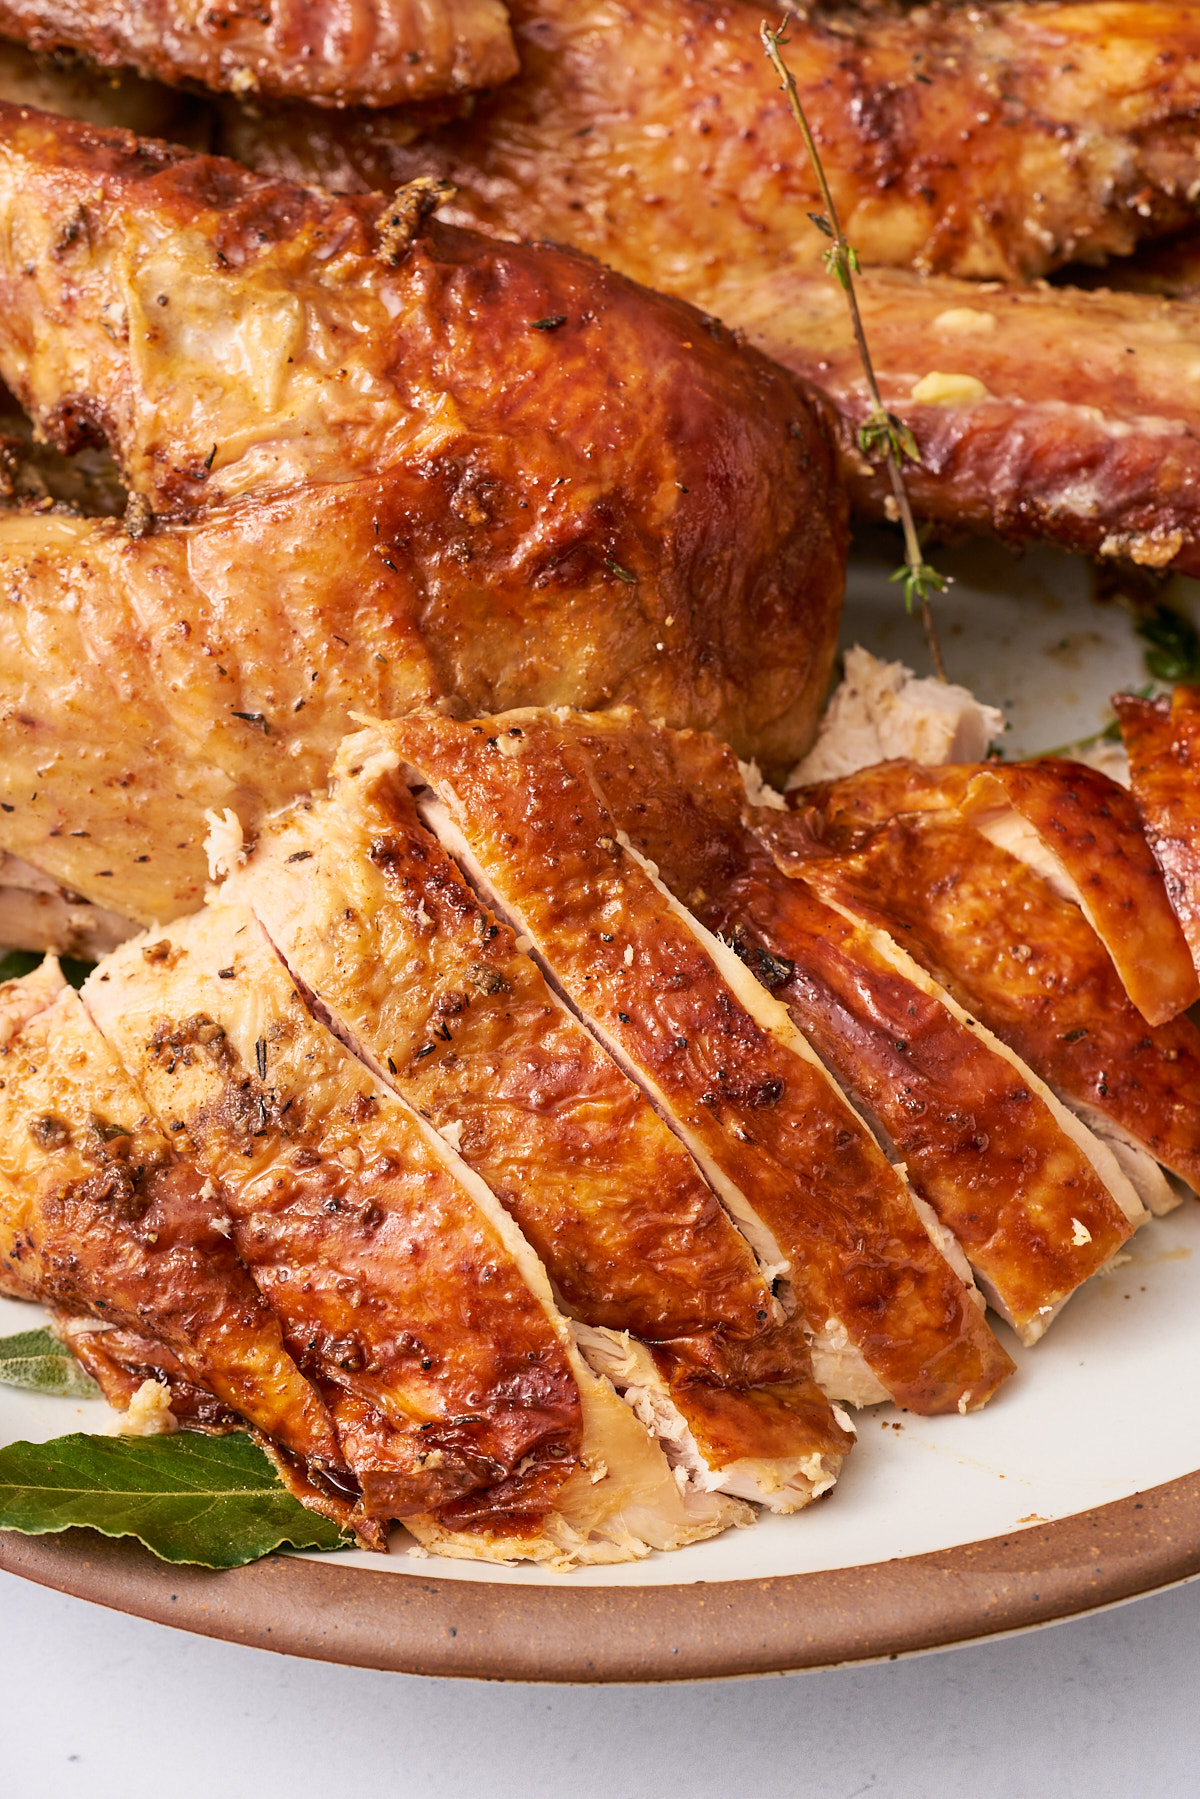 perfectly seasoned crispy skin turkey, sliced up on a plate and ready to serve.